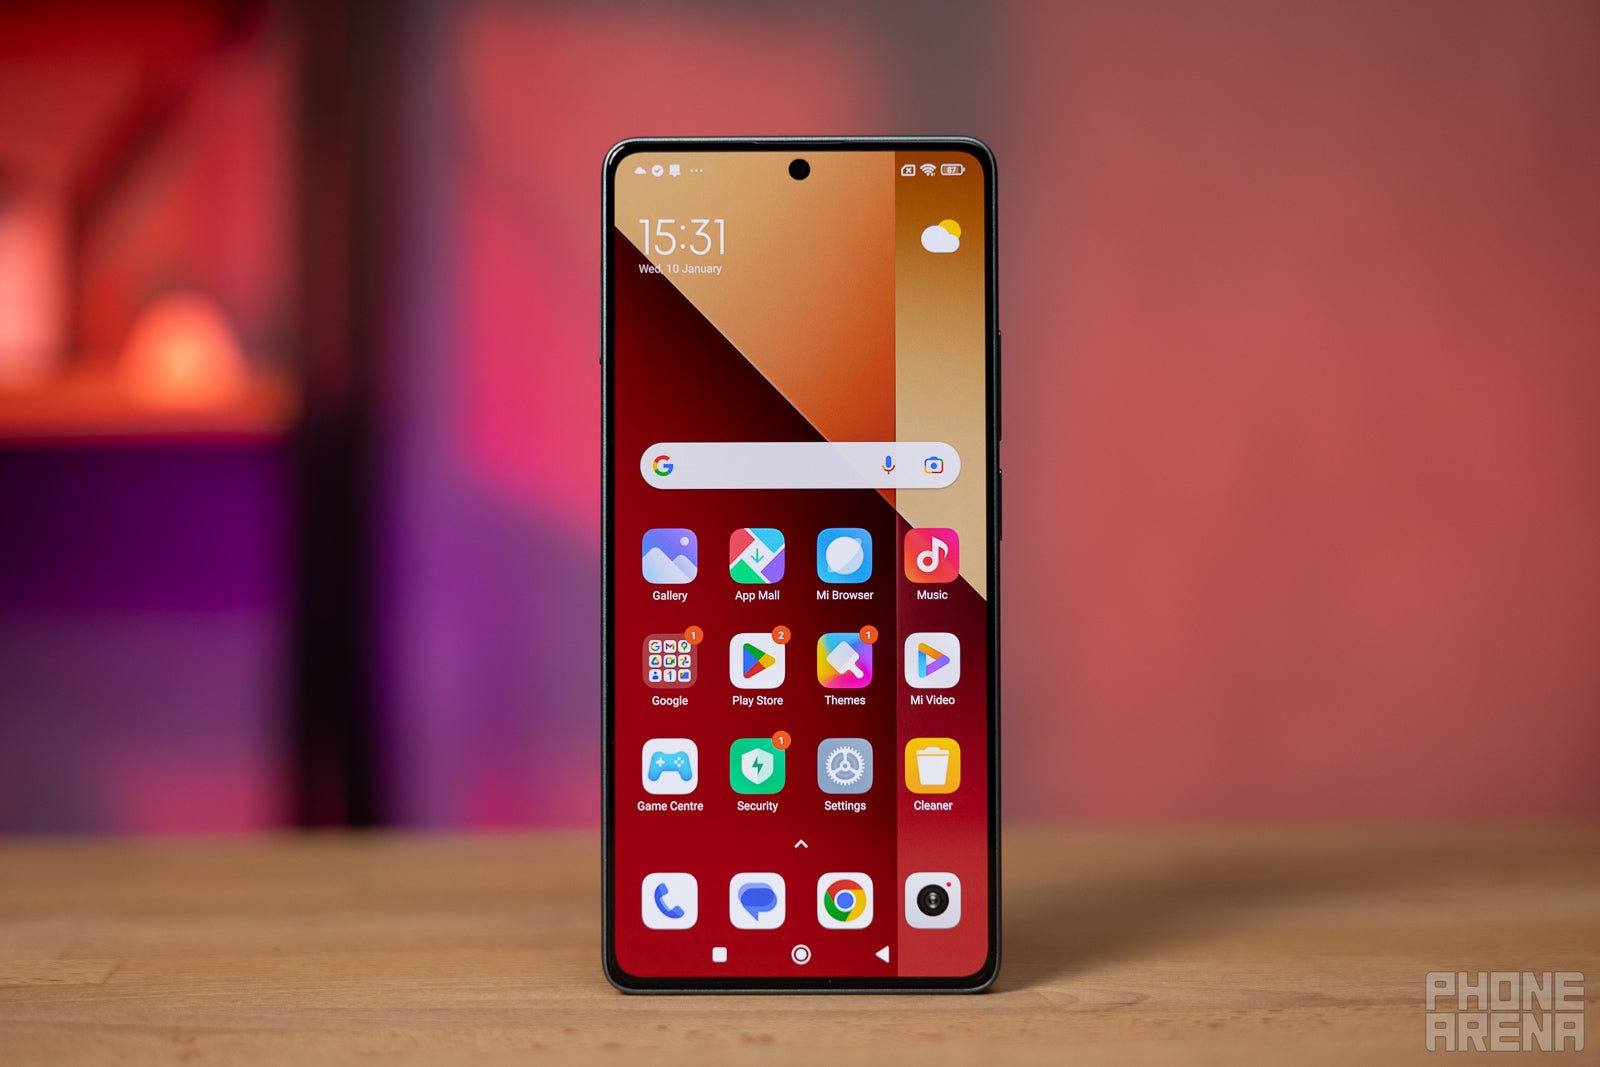 Redmi Note 10 Pro review